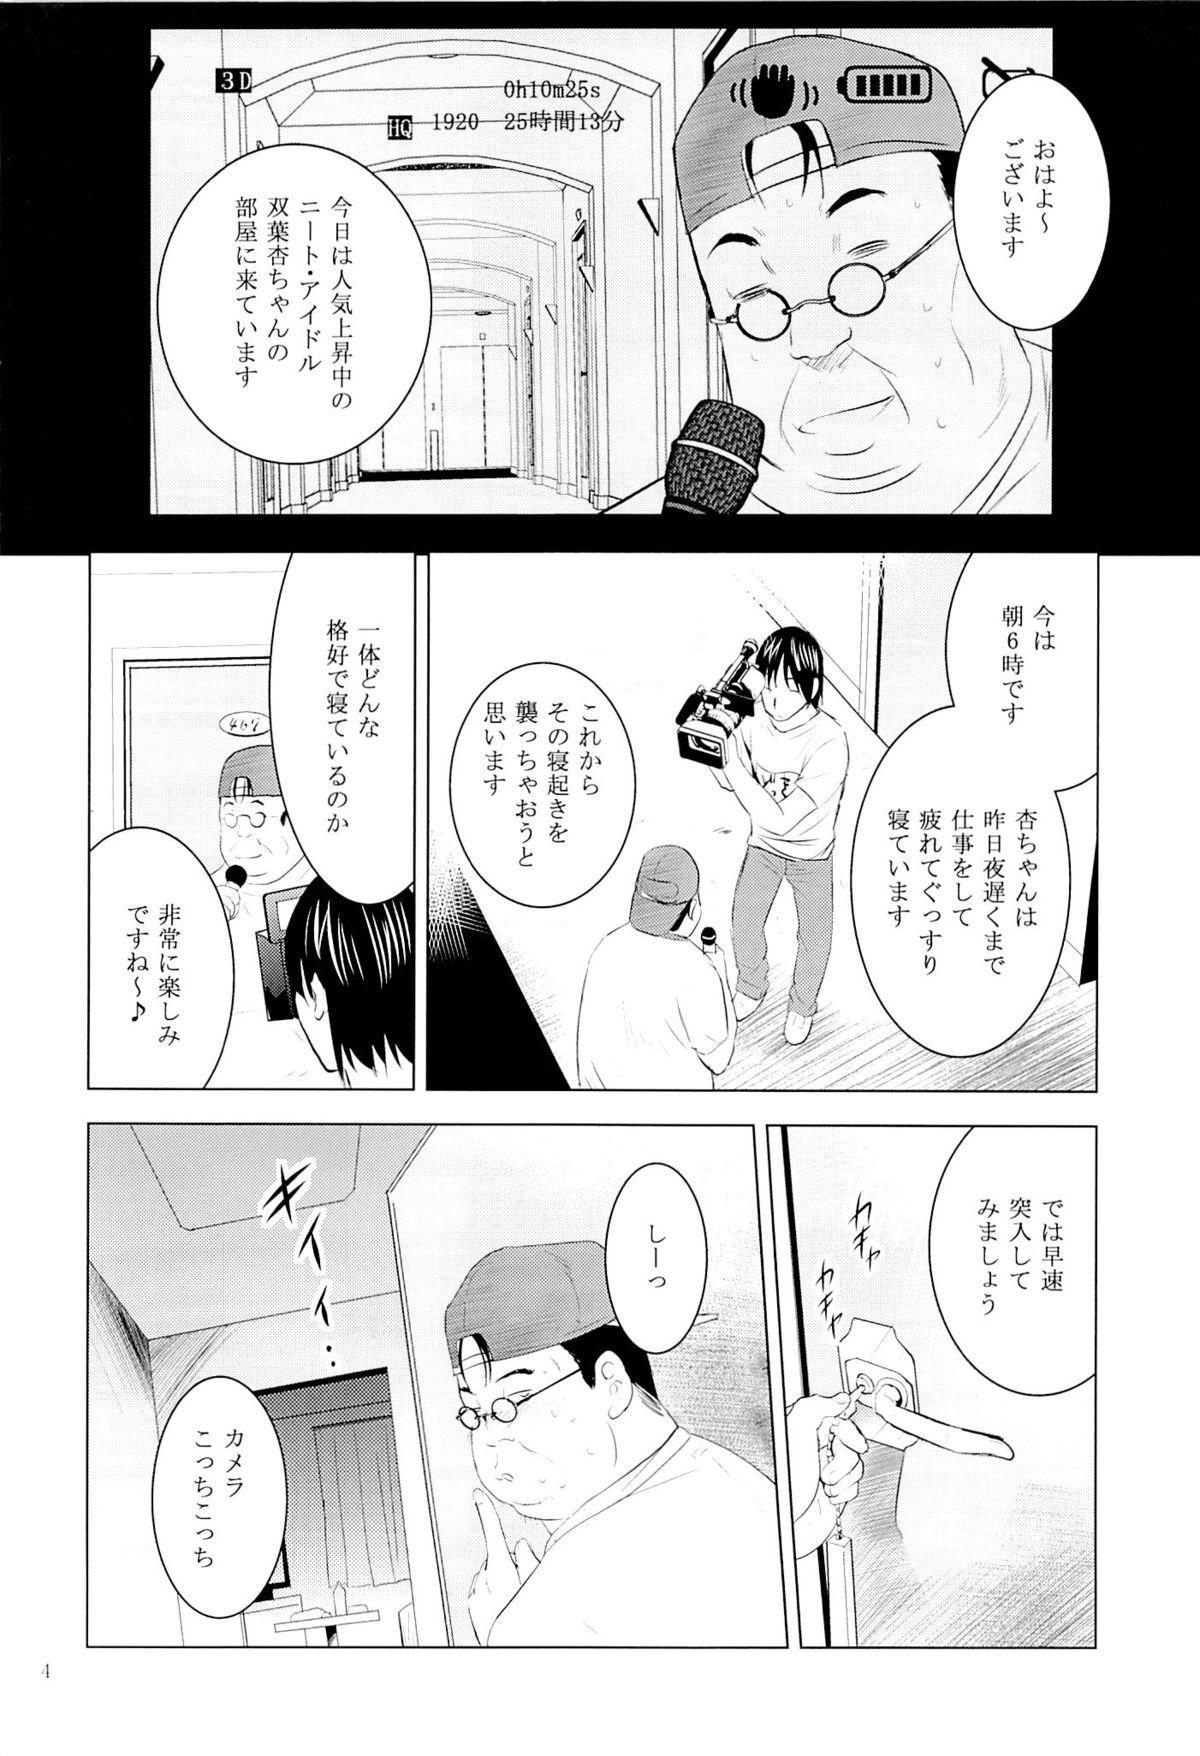 Crazy MOUSOU Mini Theater 37 - The idolmaster Les - Page 3